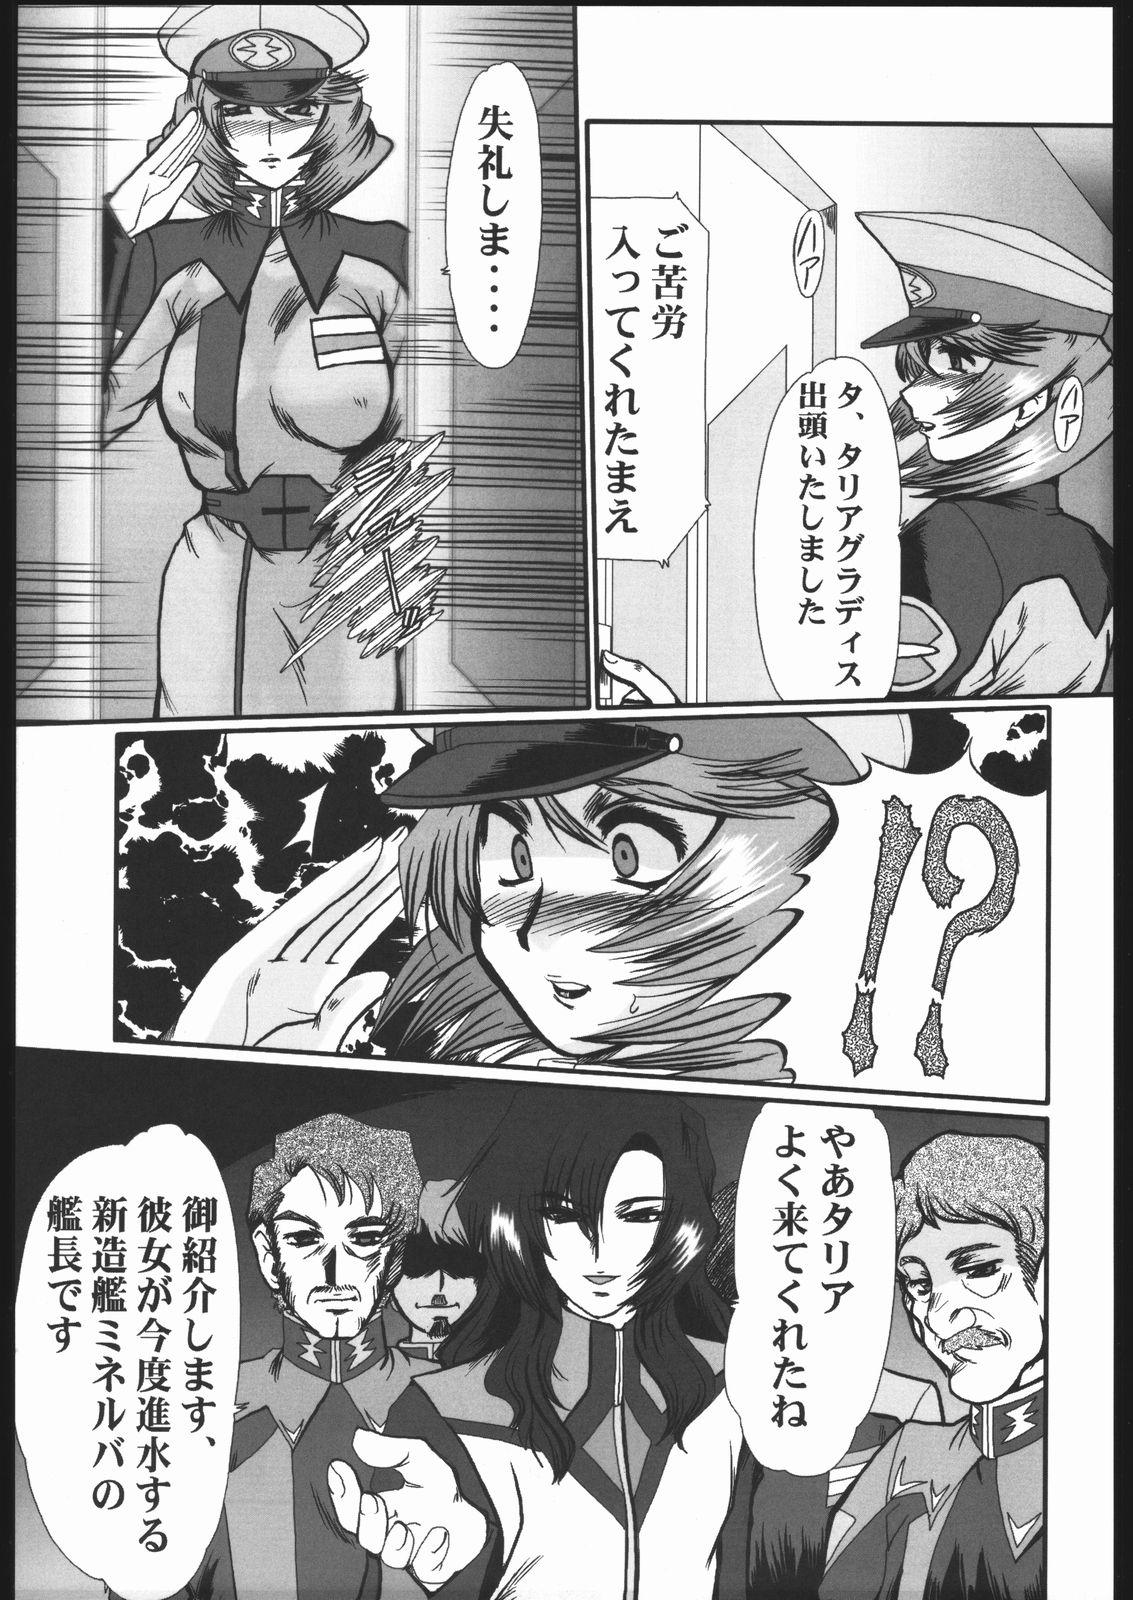 Culo Grande Guilty of a Class B - Gundam seed destiny Chubby - Page 12